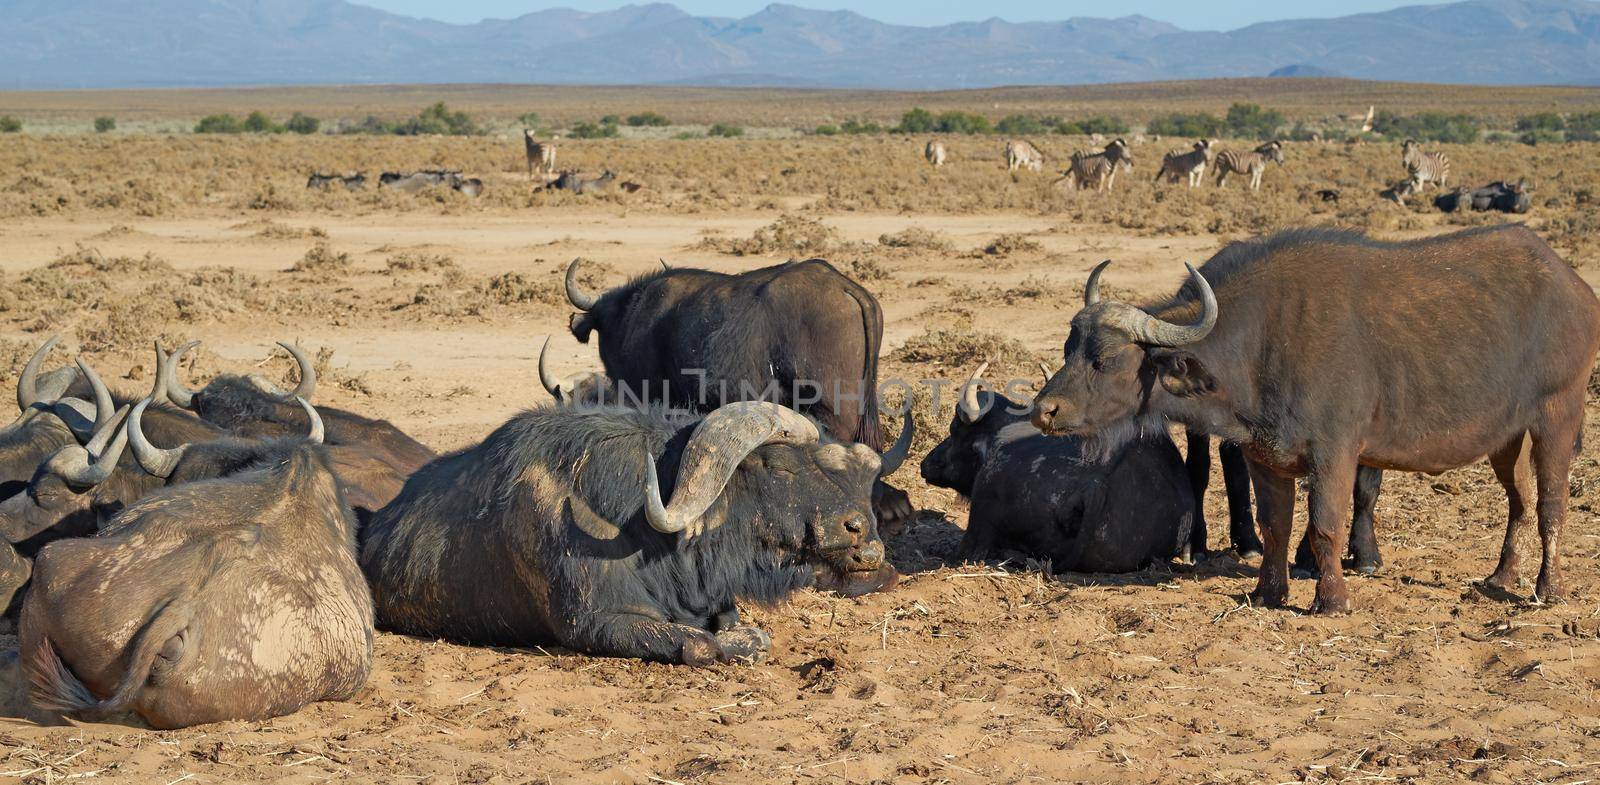 A herd of wild African Buffalo outdoors on the safari on a hot summer day. Wildlife in the savannah basking in the sun before migrating to another region. A view of animals in the wilderness.